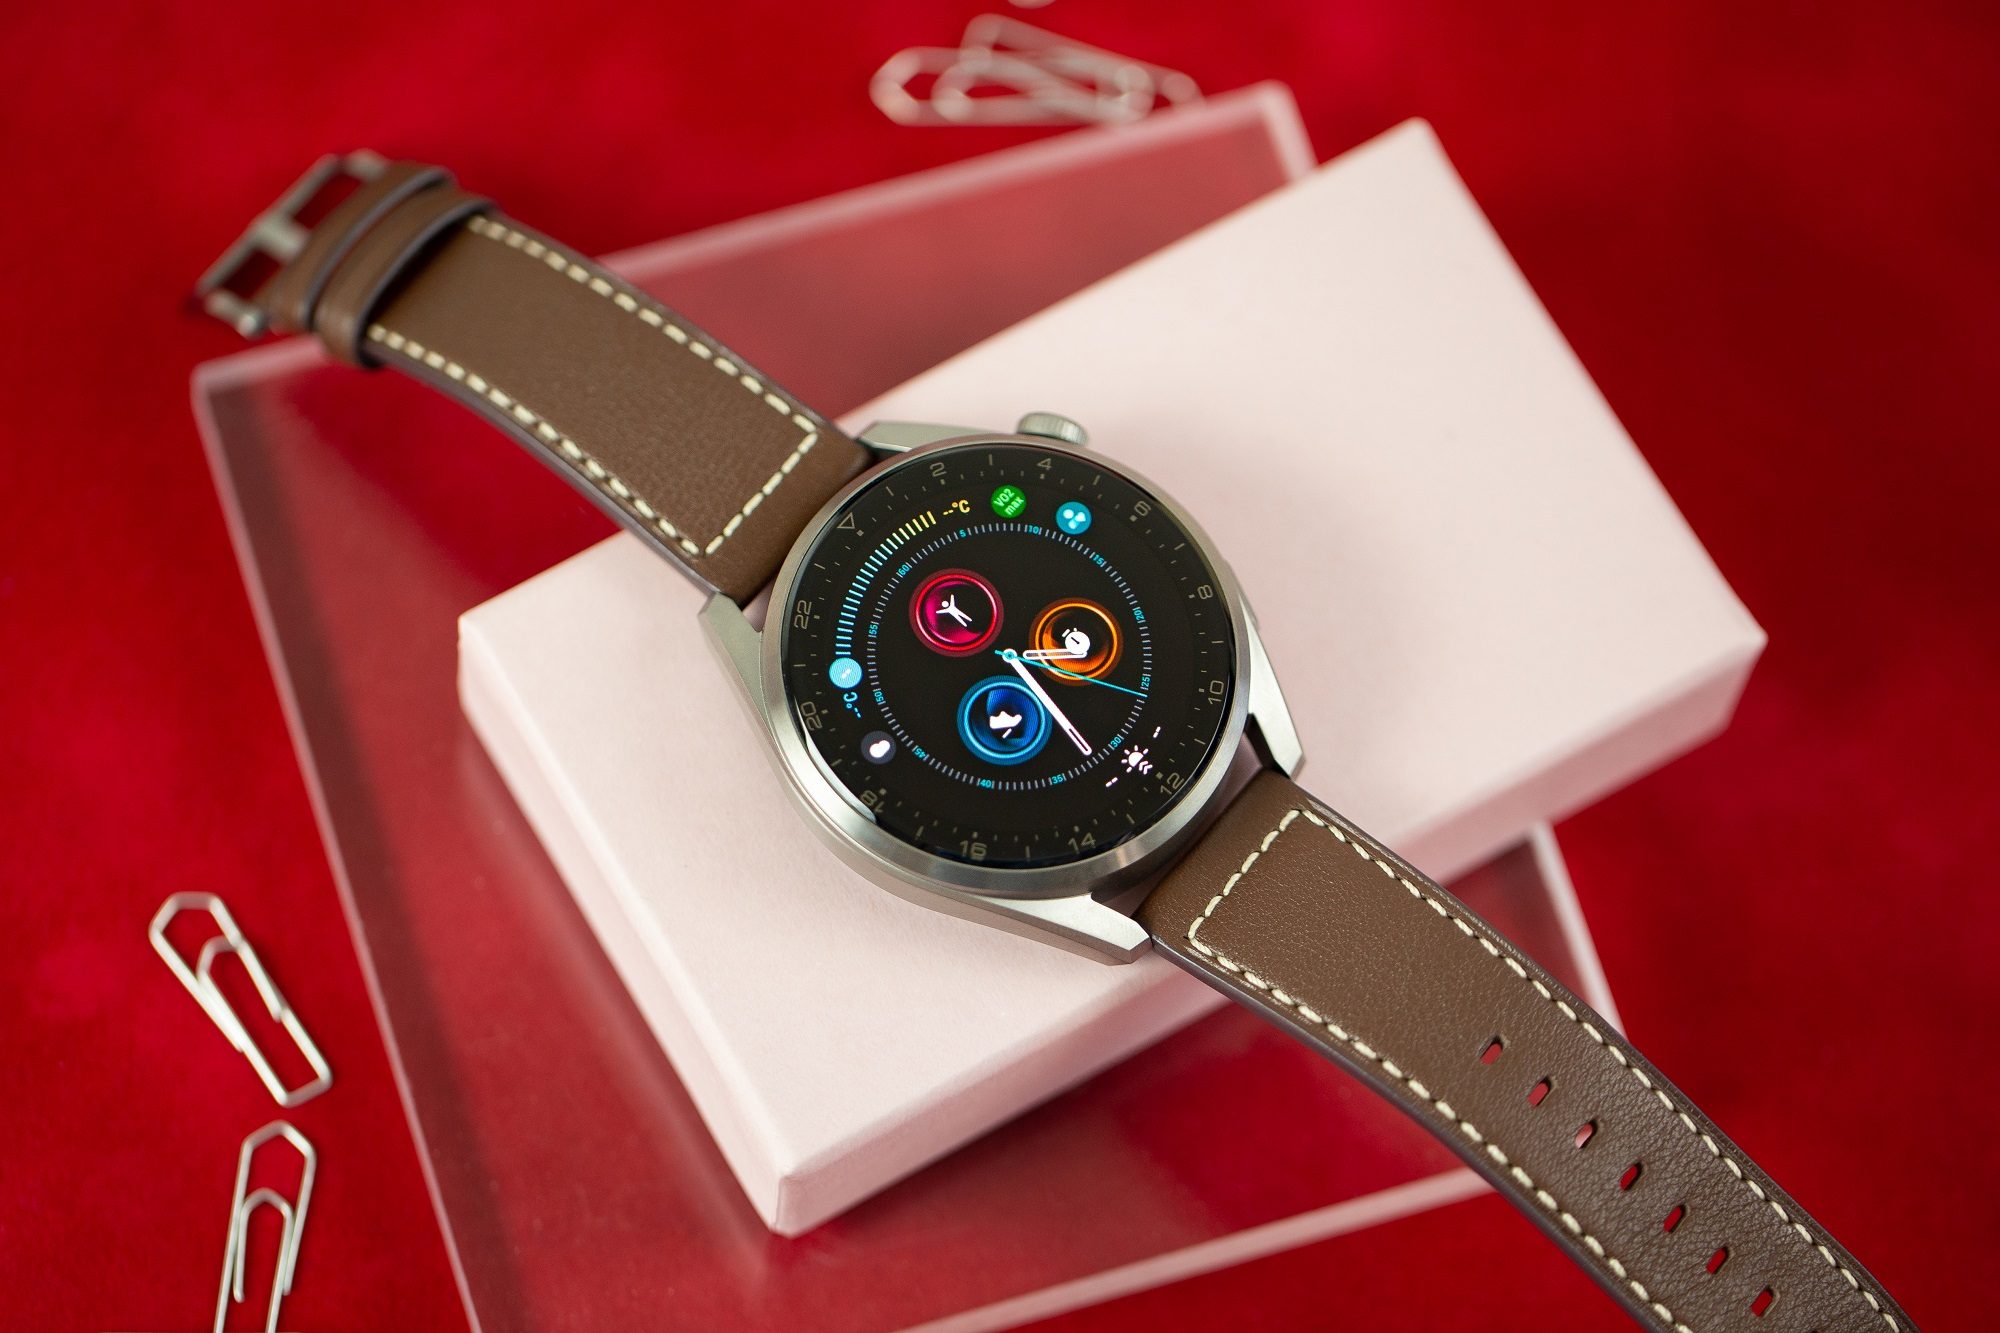 Huawei Watch GT 3 Pro launches in multiple styles and with ECG, diving and  golf features -  News